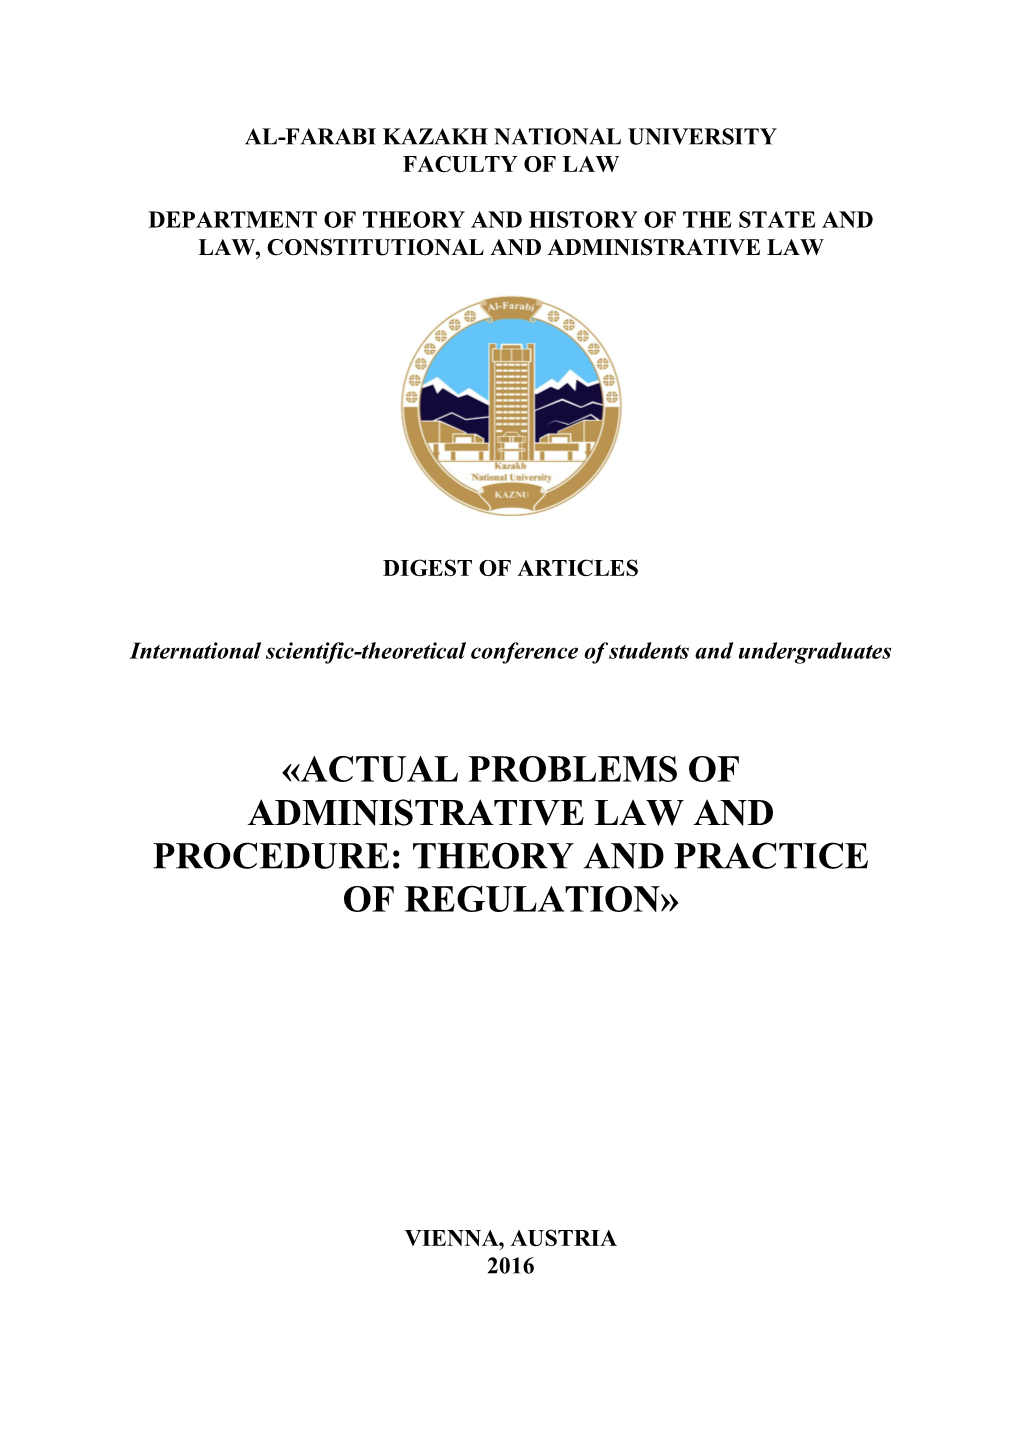 «Actual Problems of Administrative Law and Procedure: Theory and Practice of Regulation»